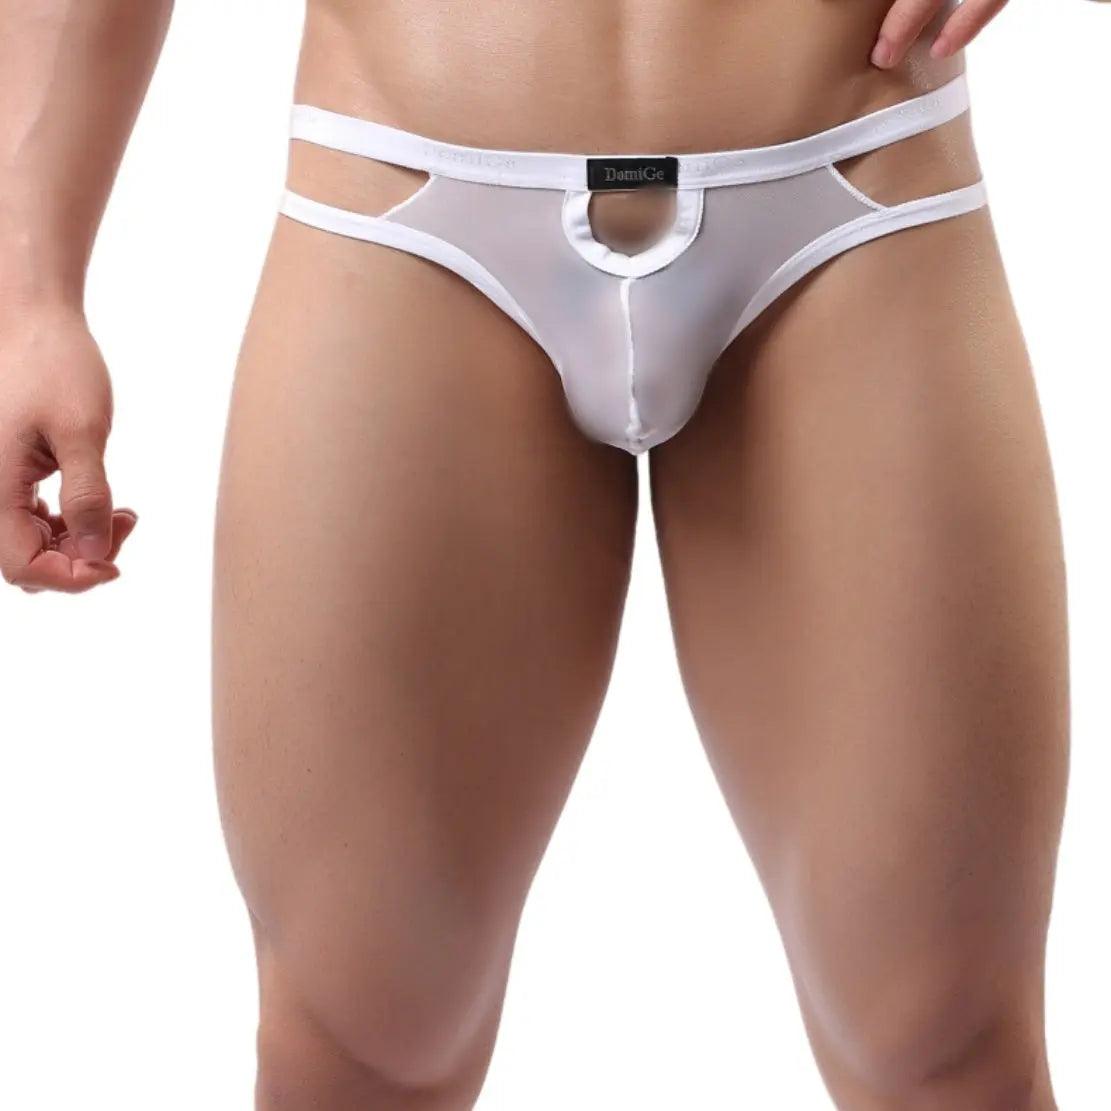 Men's Underwear with Elastic Waistband and Hollow Design G-String - His Inwear